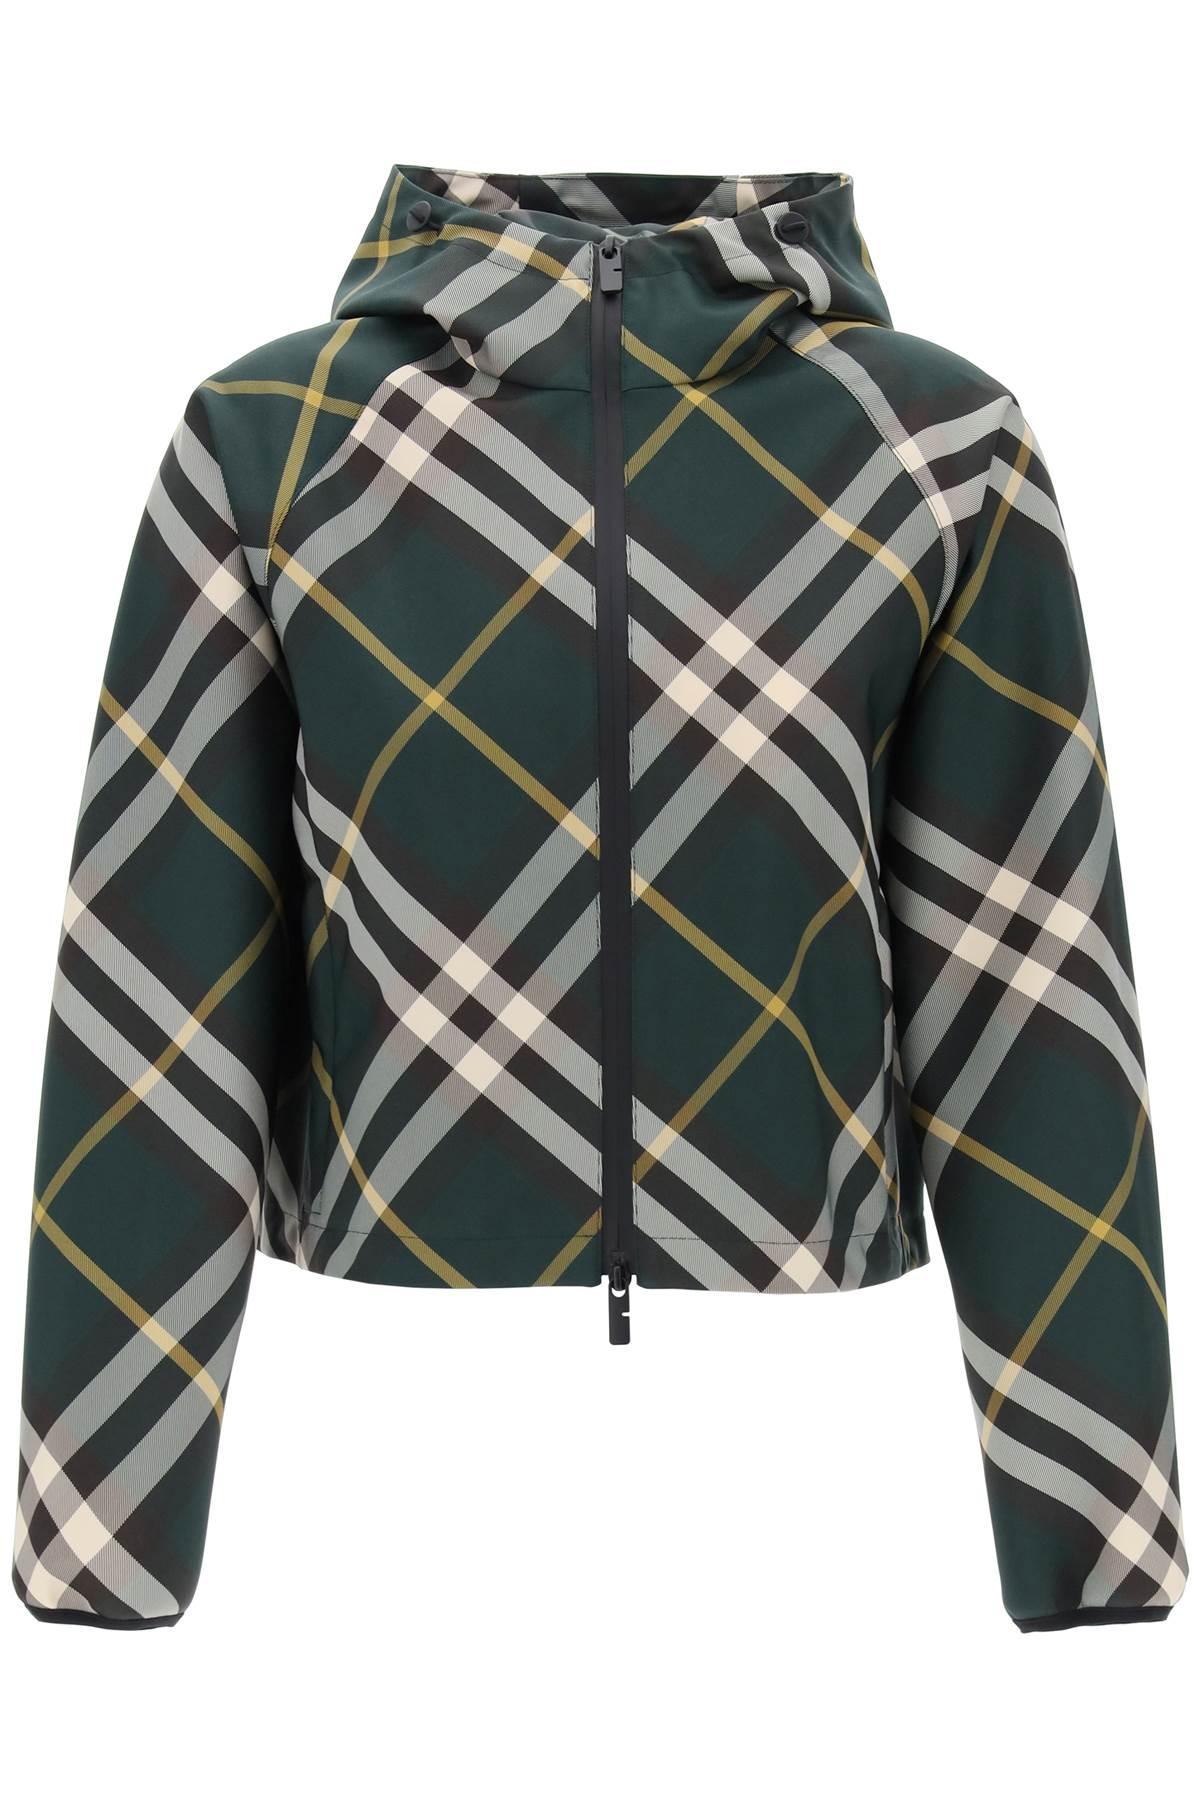 Burberry Cropped Check Lightweight Jacket in Ivy - JOHN JULIA